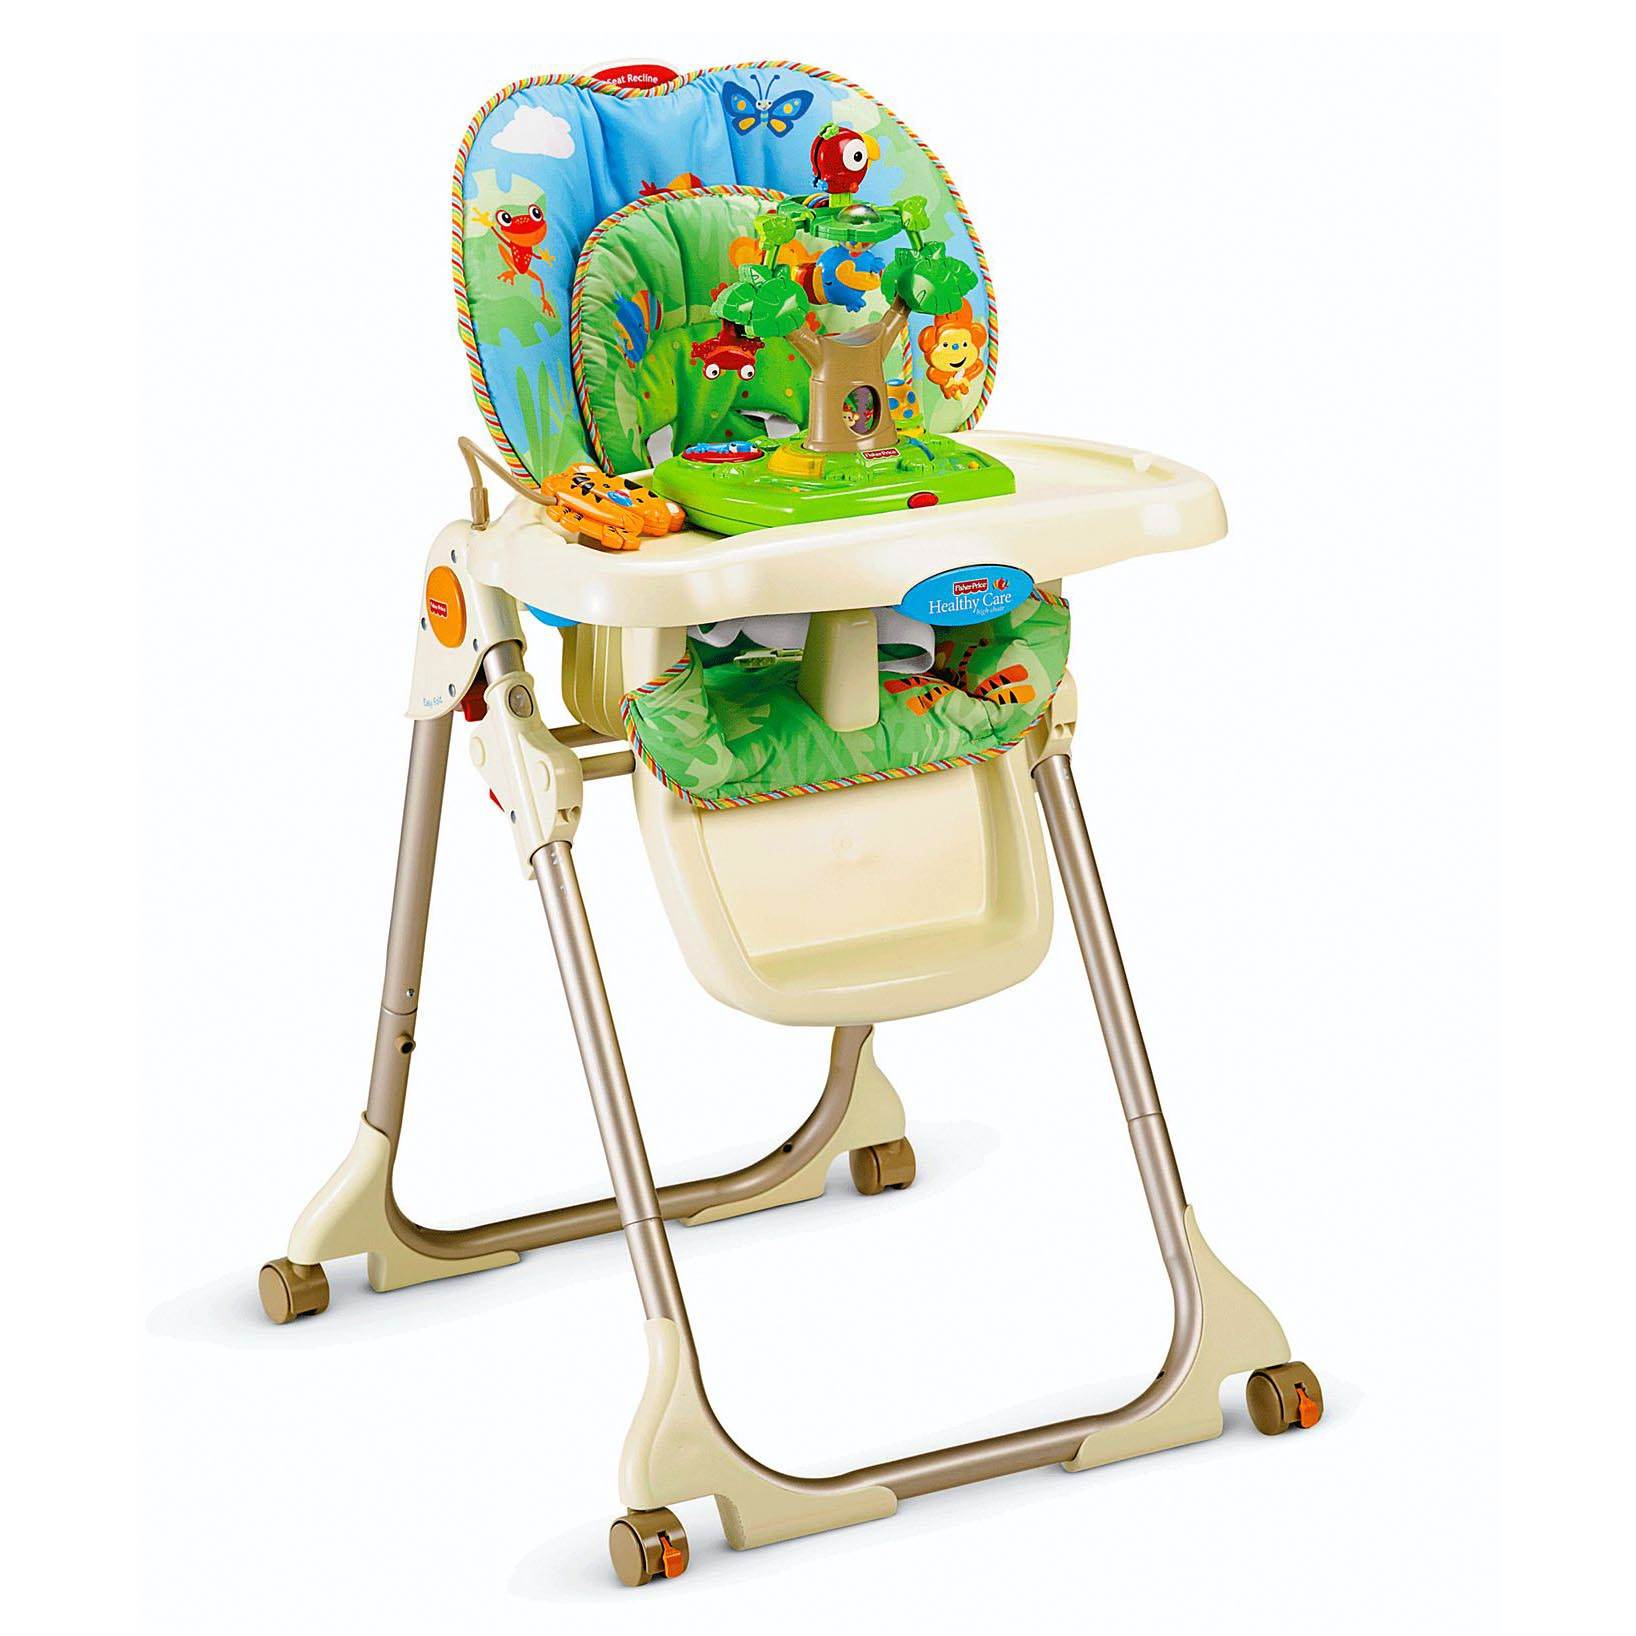 Fisher Price Rainforest Healthy Care High Chair with Dishwasher Safe Tray W3066 - image 1 of 5